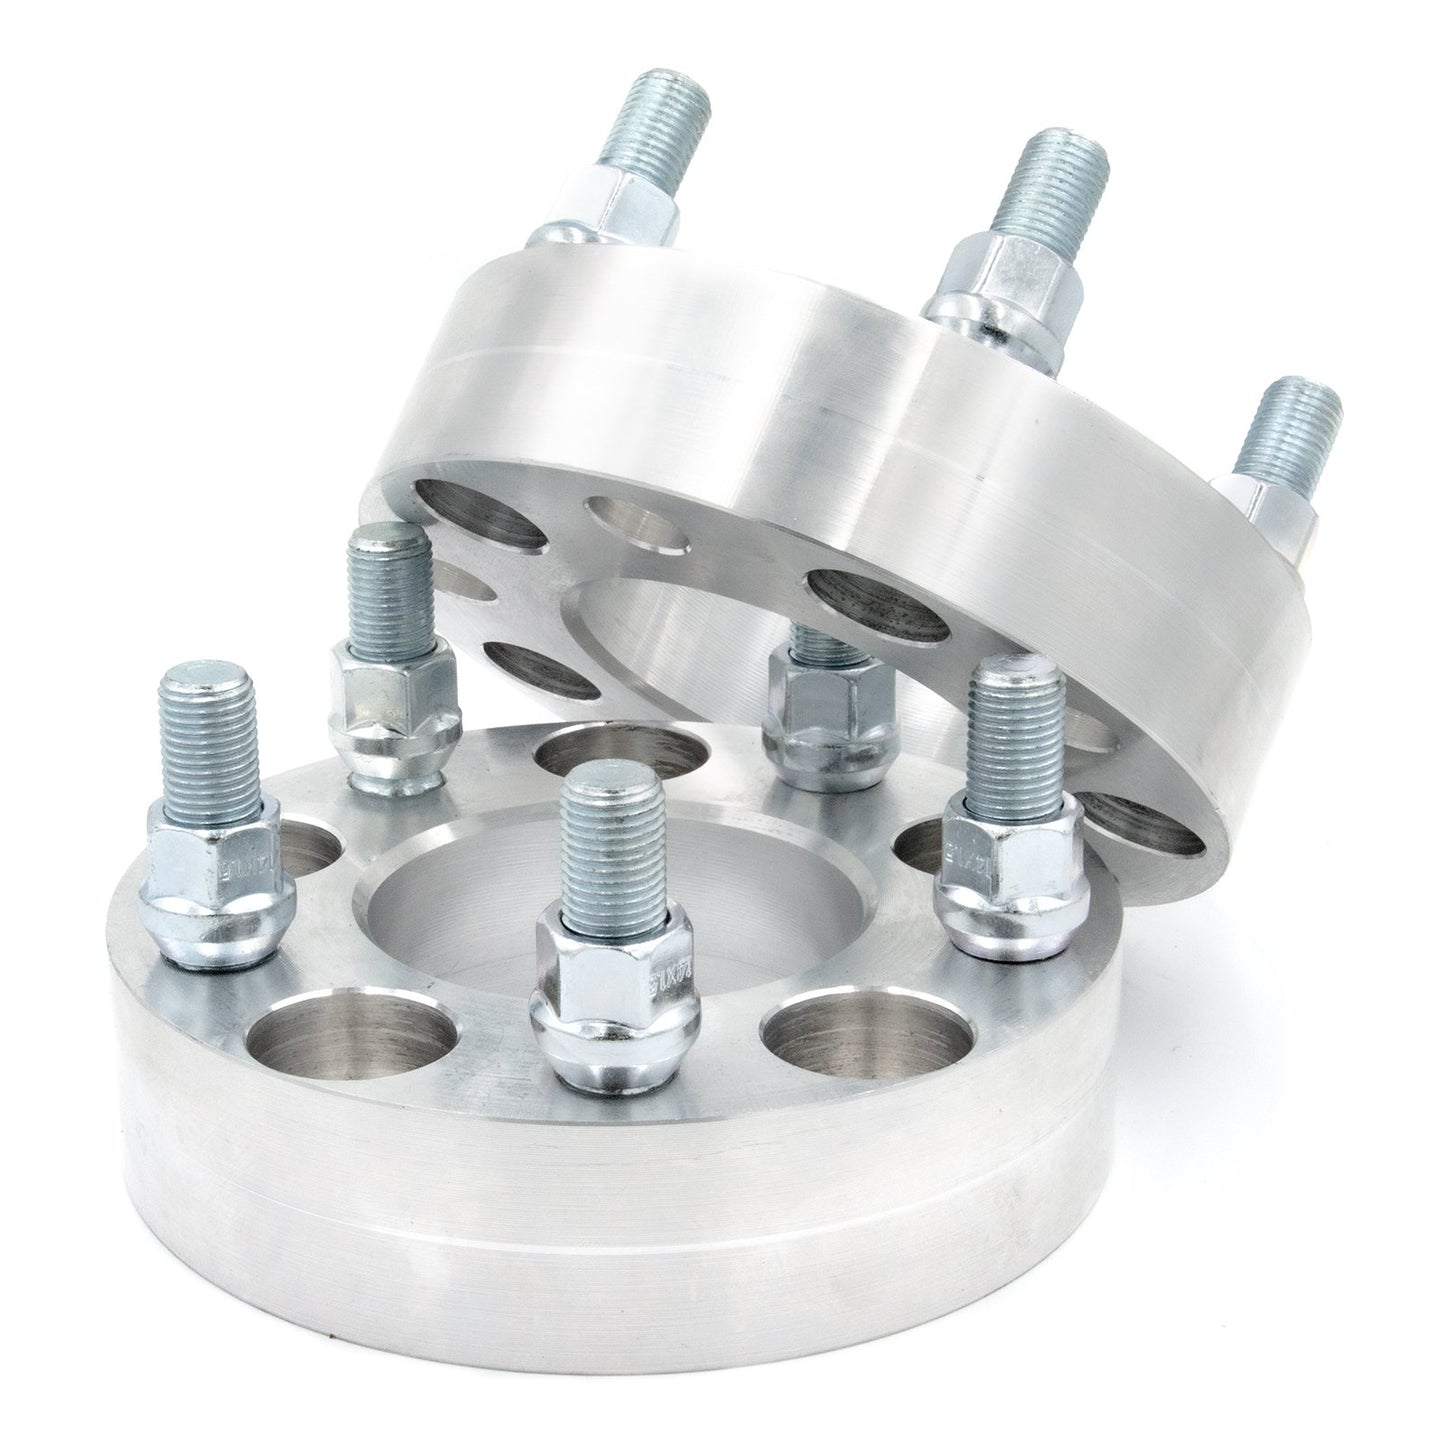 5x5" to 5x120 Wheel Spacer/Adapter - Thickness: 3/4"- 4"